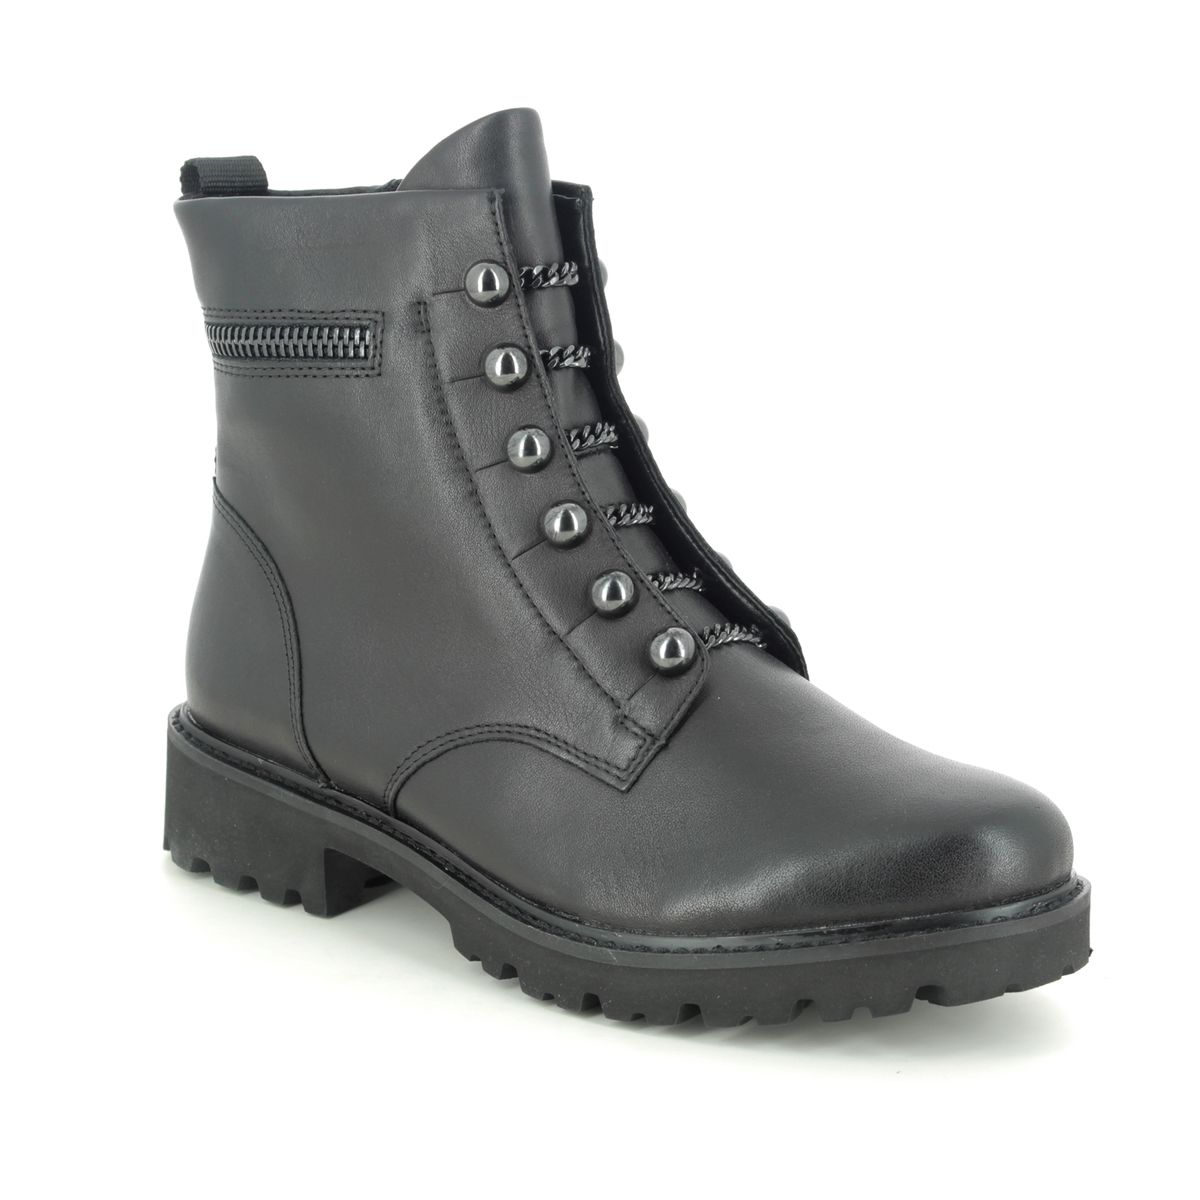 Remonte Docland Black Leather Womens Biker Boots D8670-01 In Size 39 In Plain Black Leather